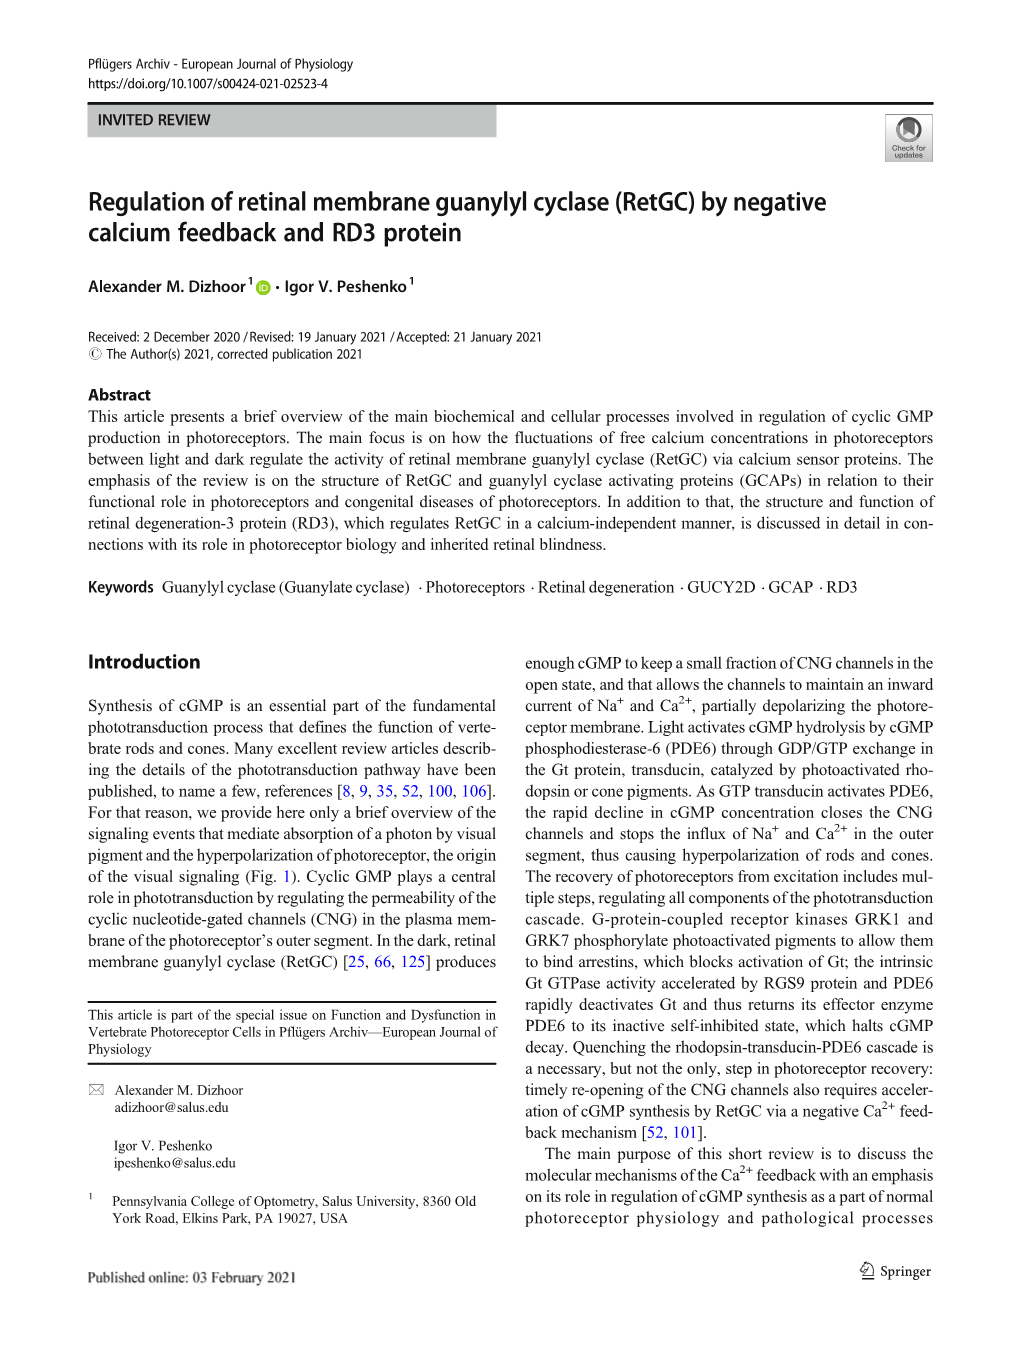 Regulation of Retinal Membrane Guanylyl Cyclase (Retgc) by Negative Calcium Feedback and RD3 Protein